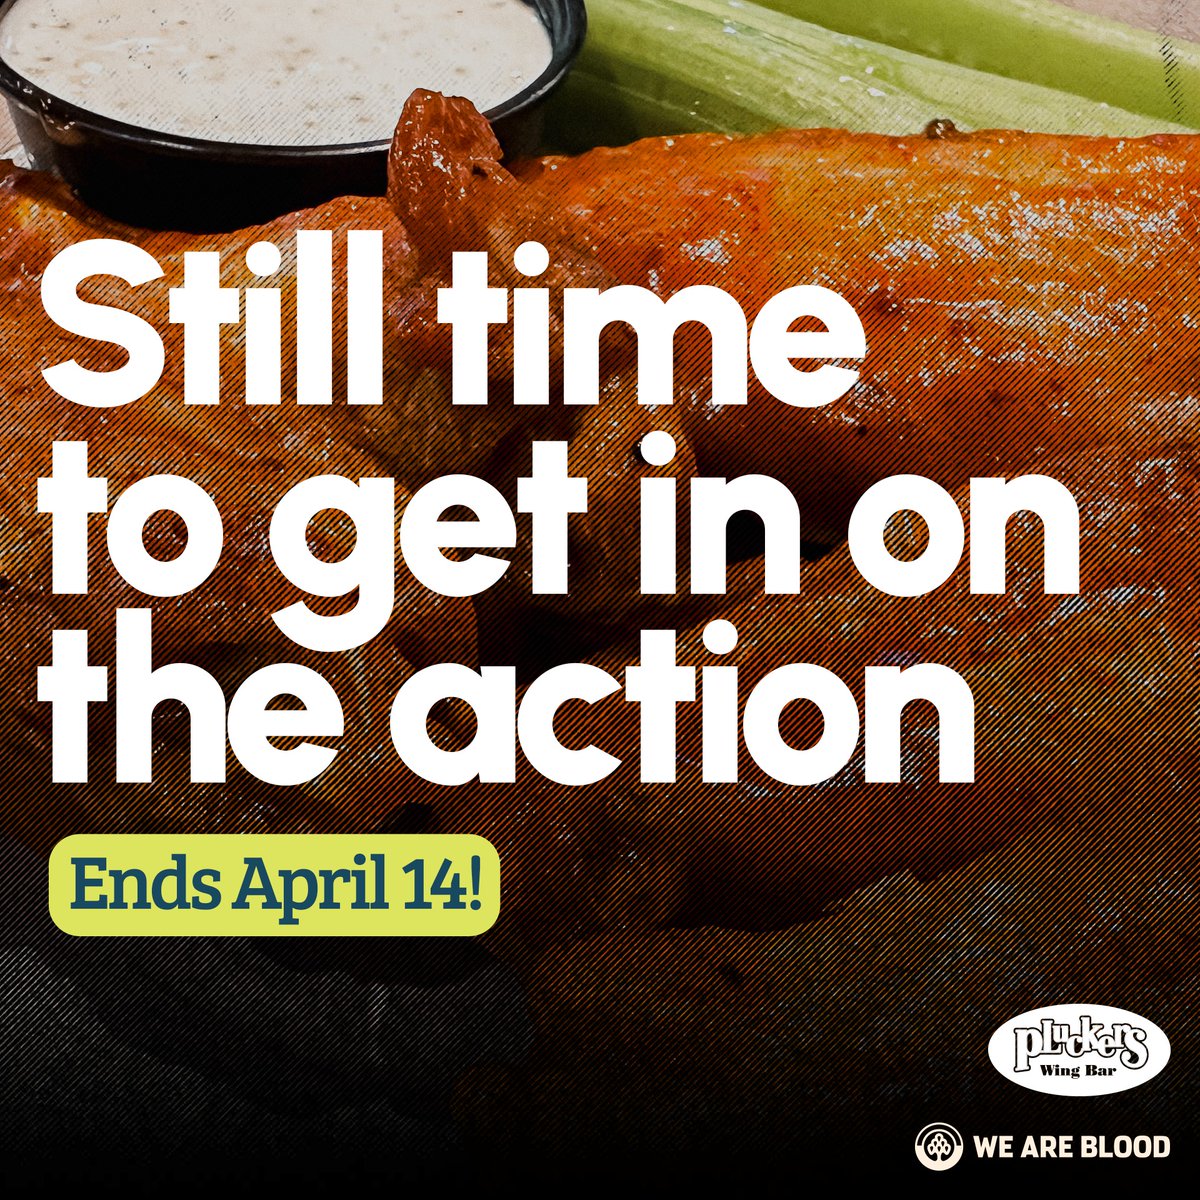 Countdown to wing time! 🍗 Donate blood or platelets with We Are Blood by April 14, and we'll thank you with five FREE wings from @Pluckers. Good deeds deserve great rewards! Book your appointment now at weareblood.org/donor.